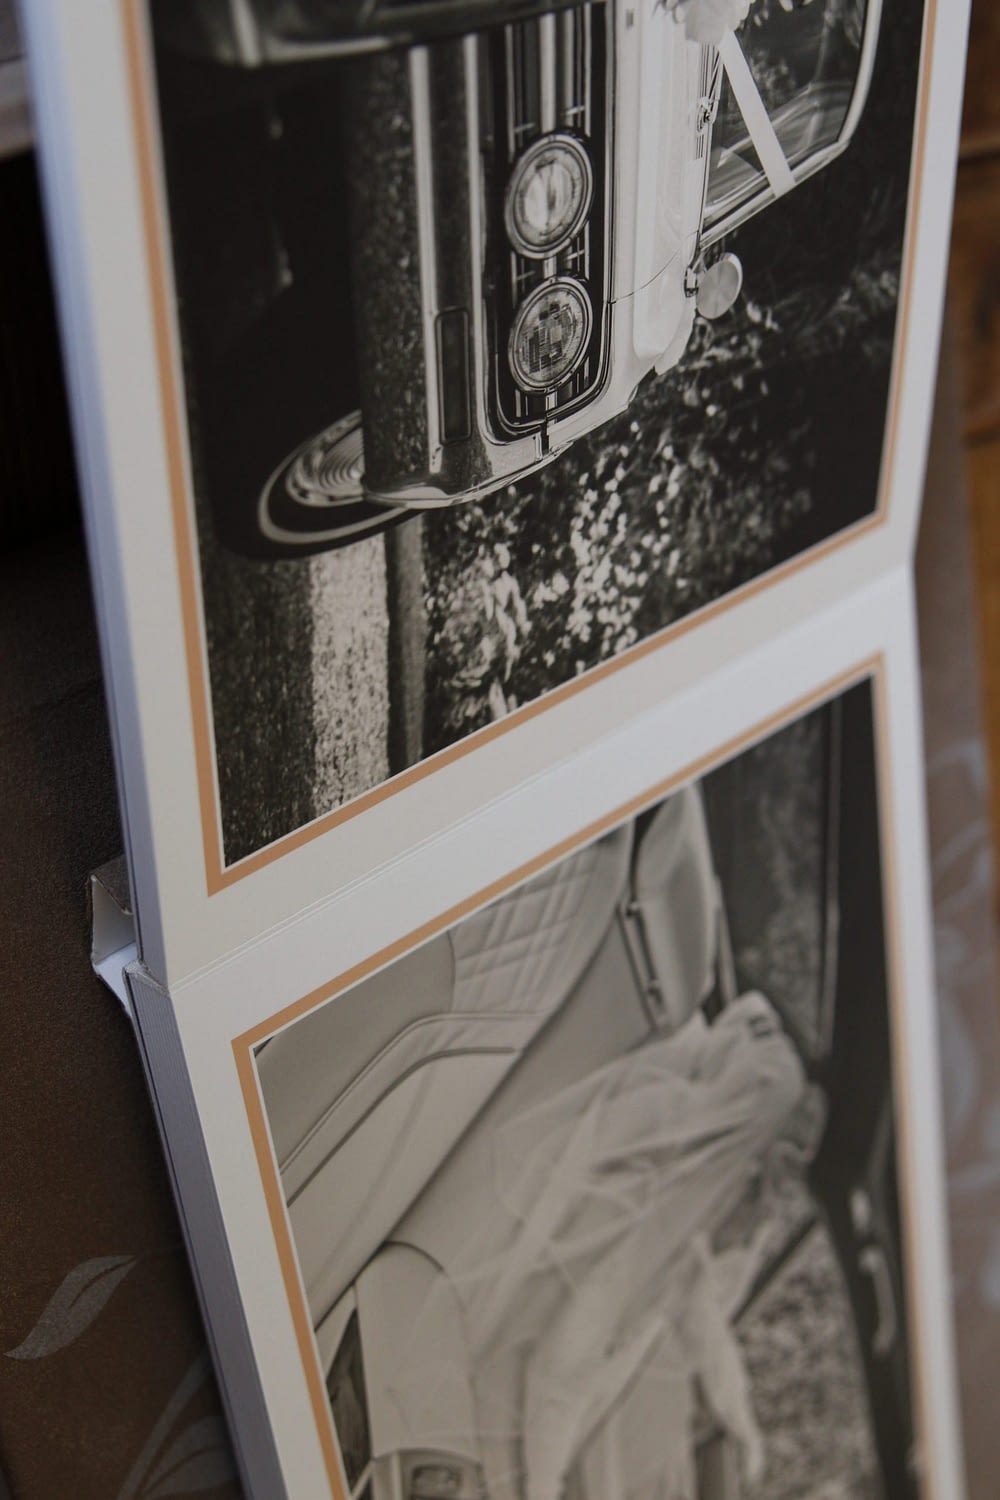 open book showing picture of car and a bride